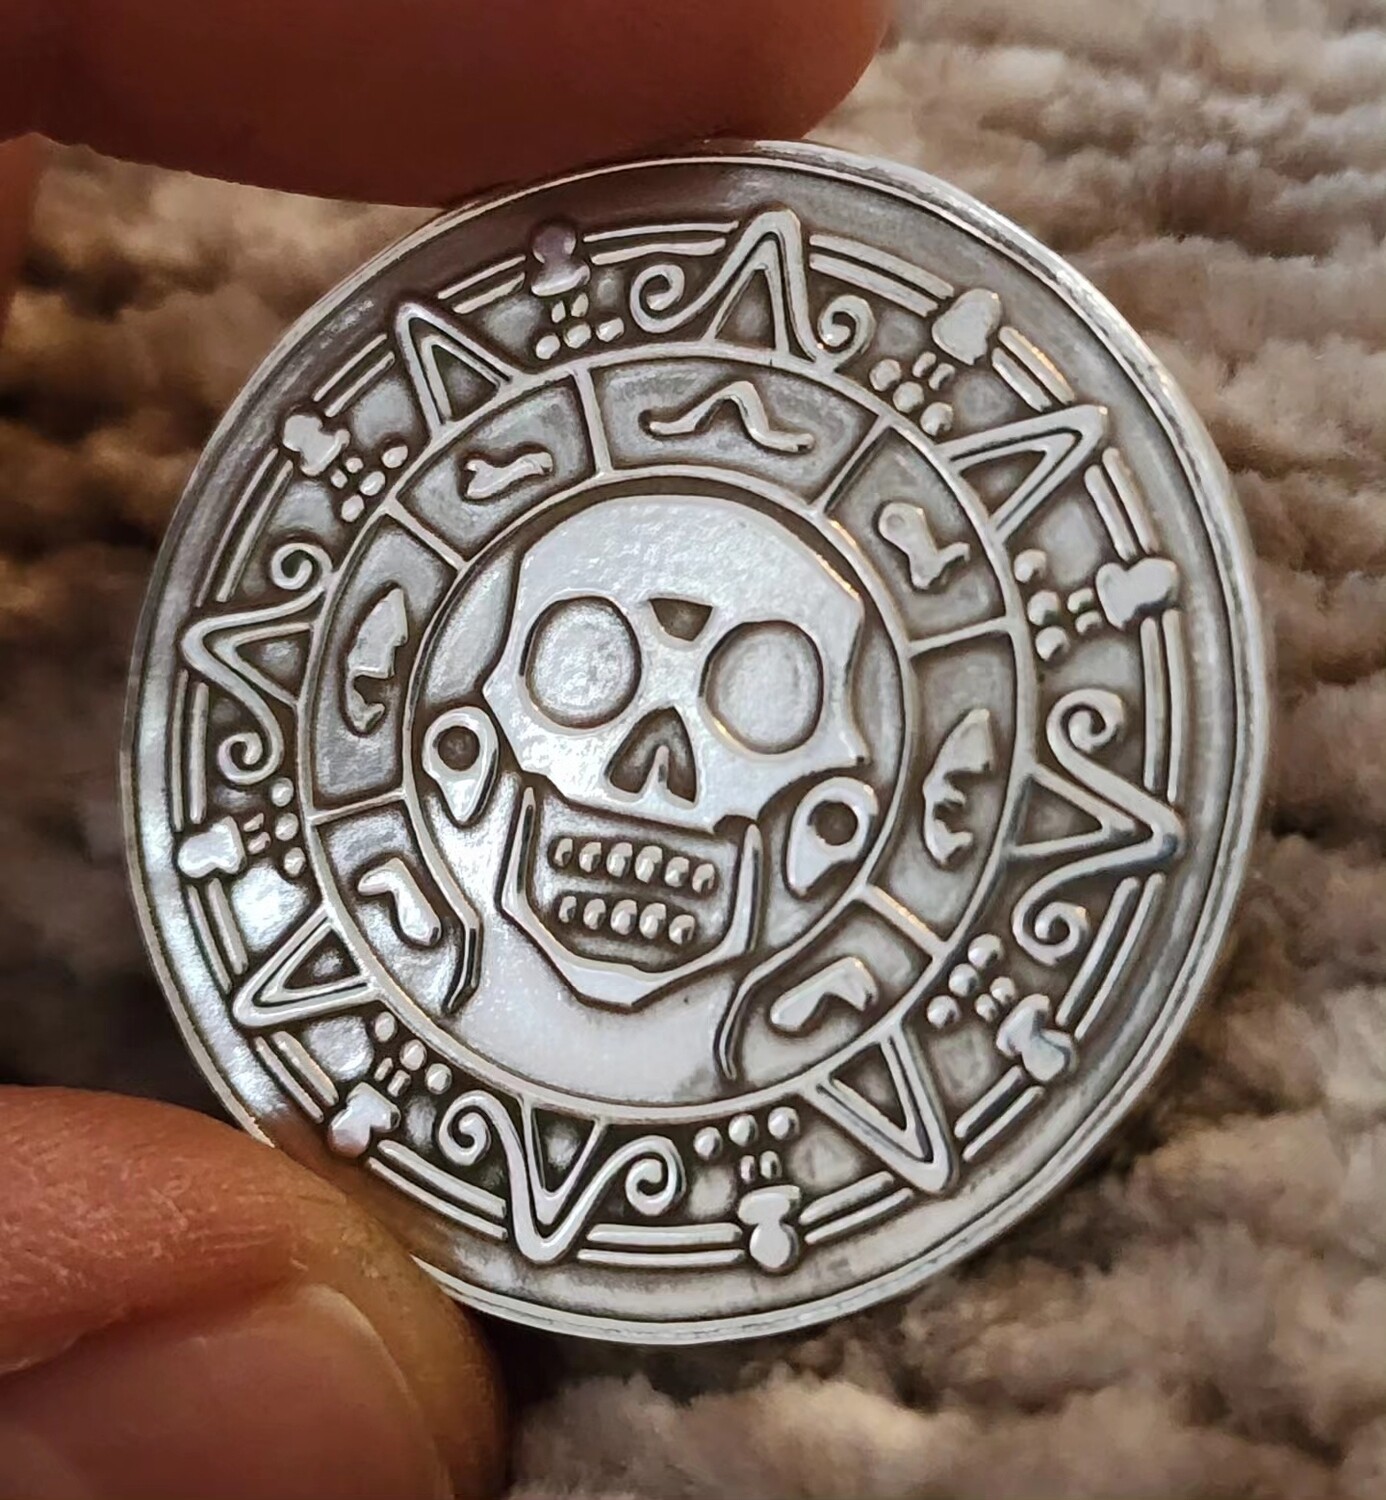 Laser engraved Cursed coin 999 fine silver